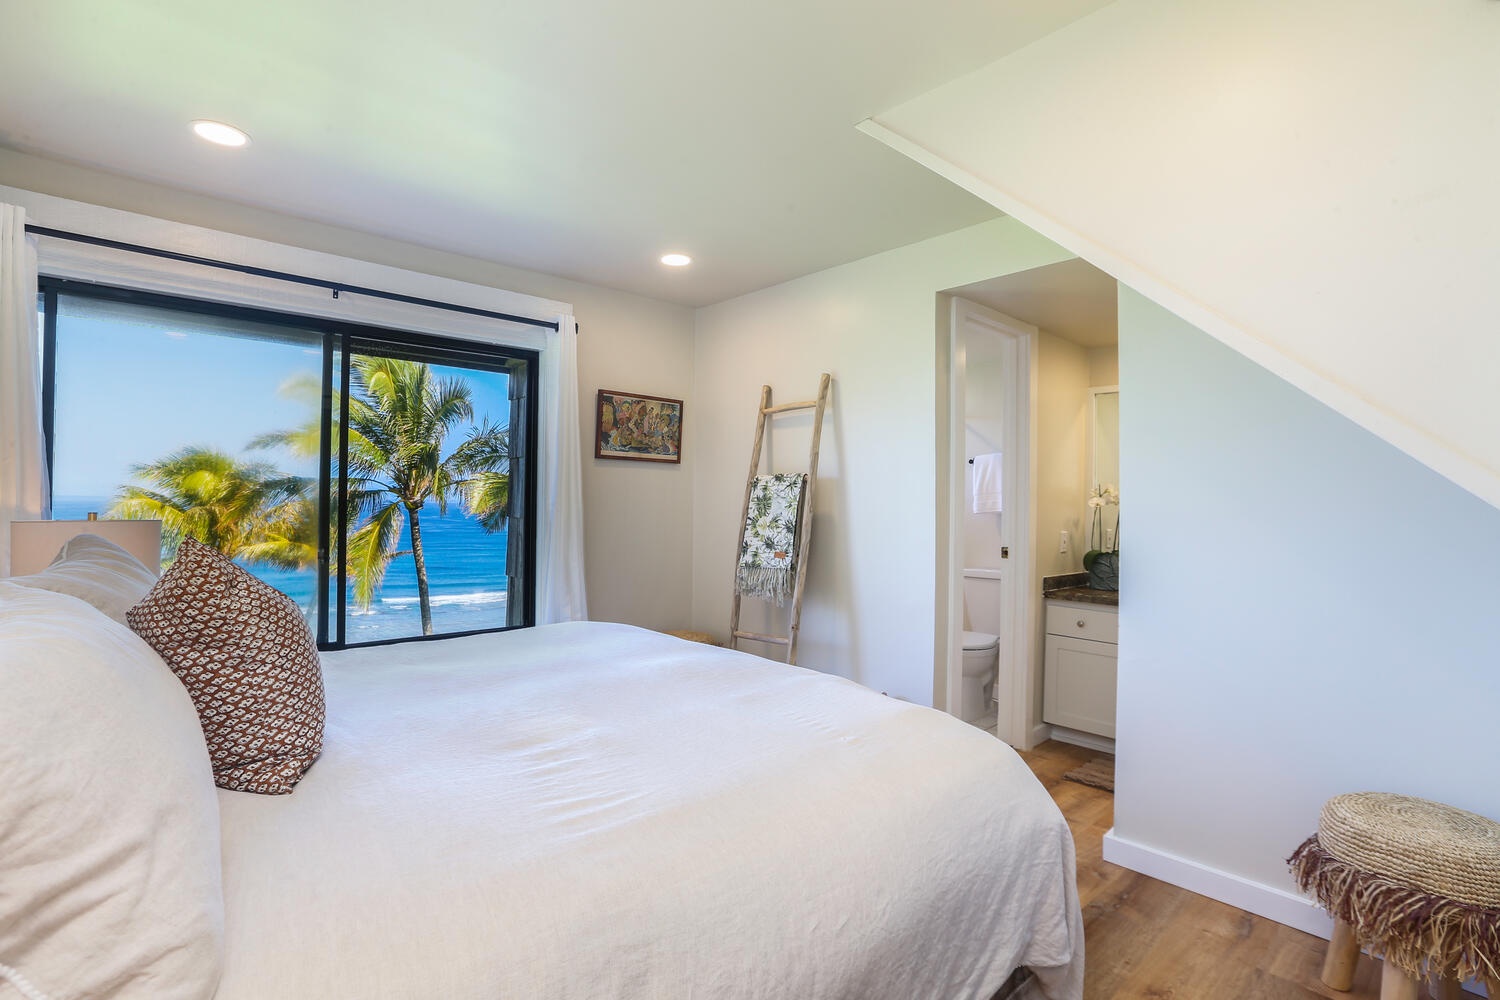 Princeville Vacation Rentals, Sealodge J8 - Furnished with a king bed